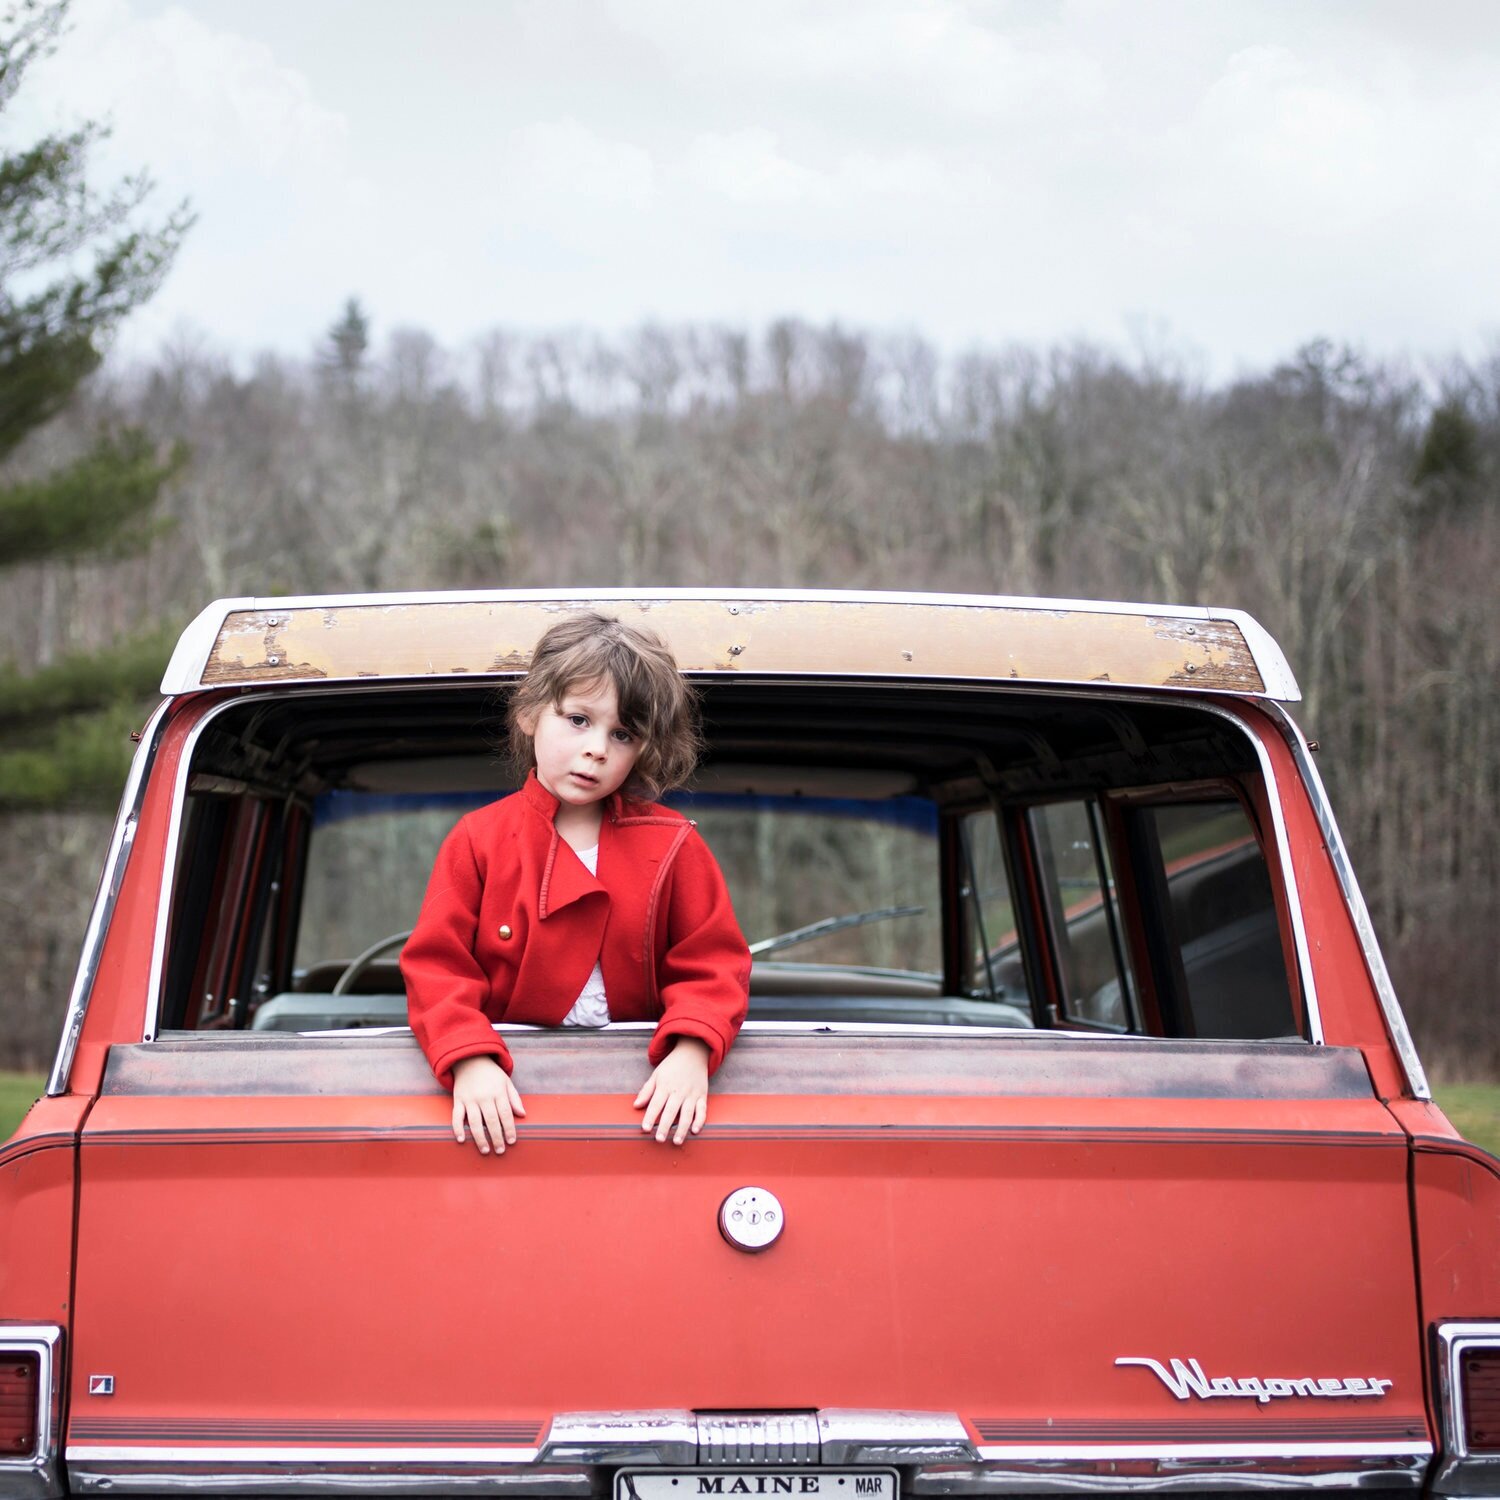 Cig Harvey: Scout and the Wagoneer